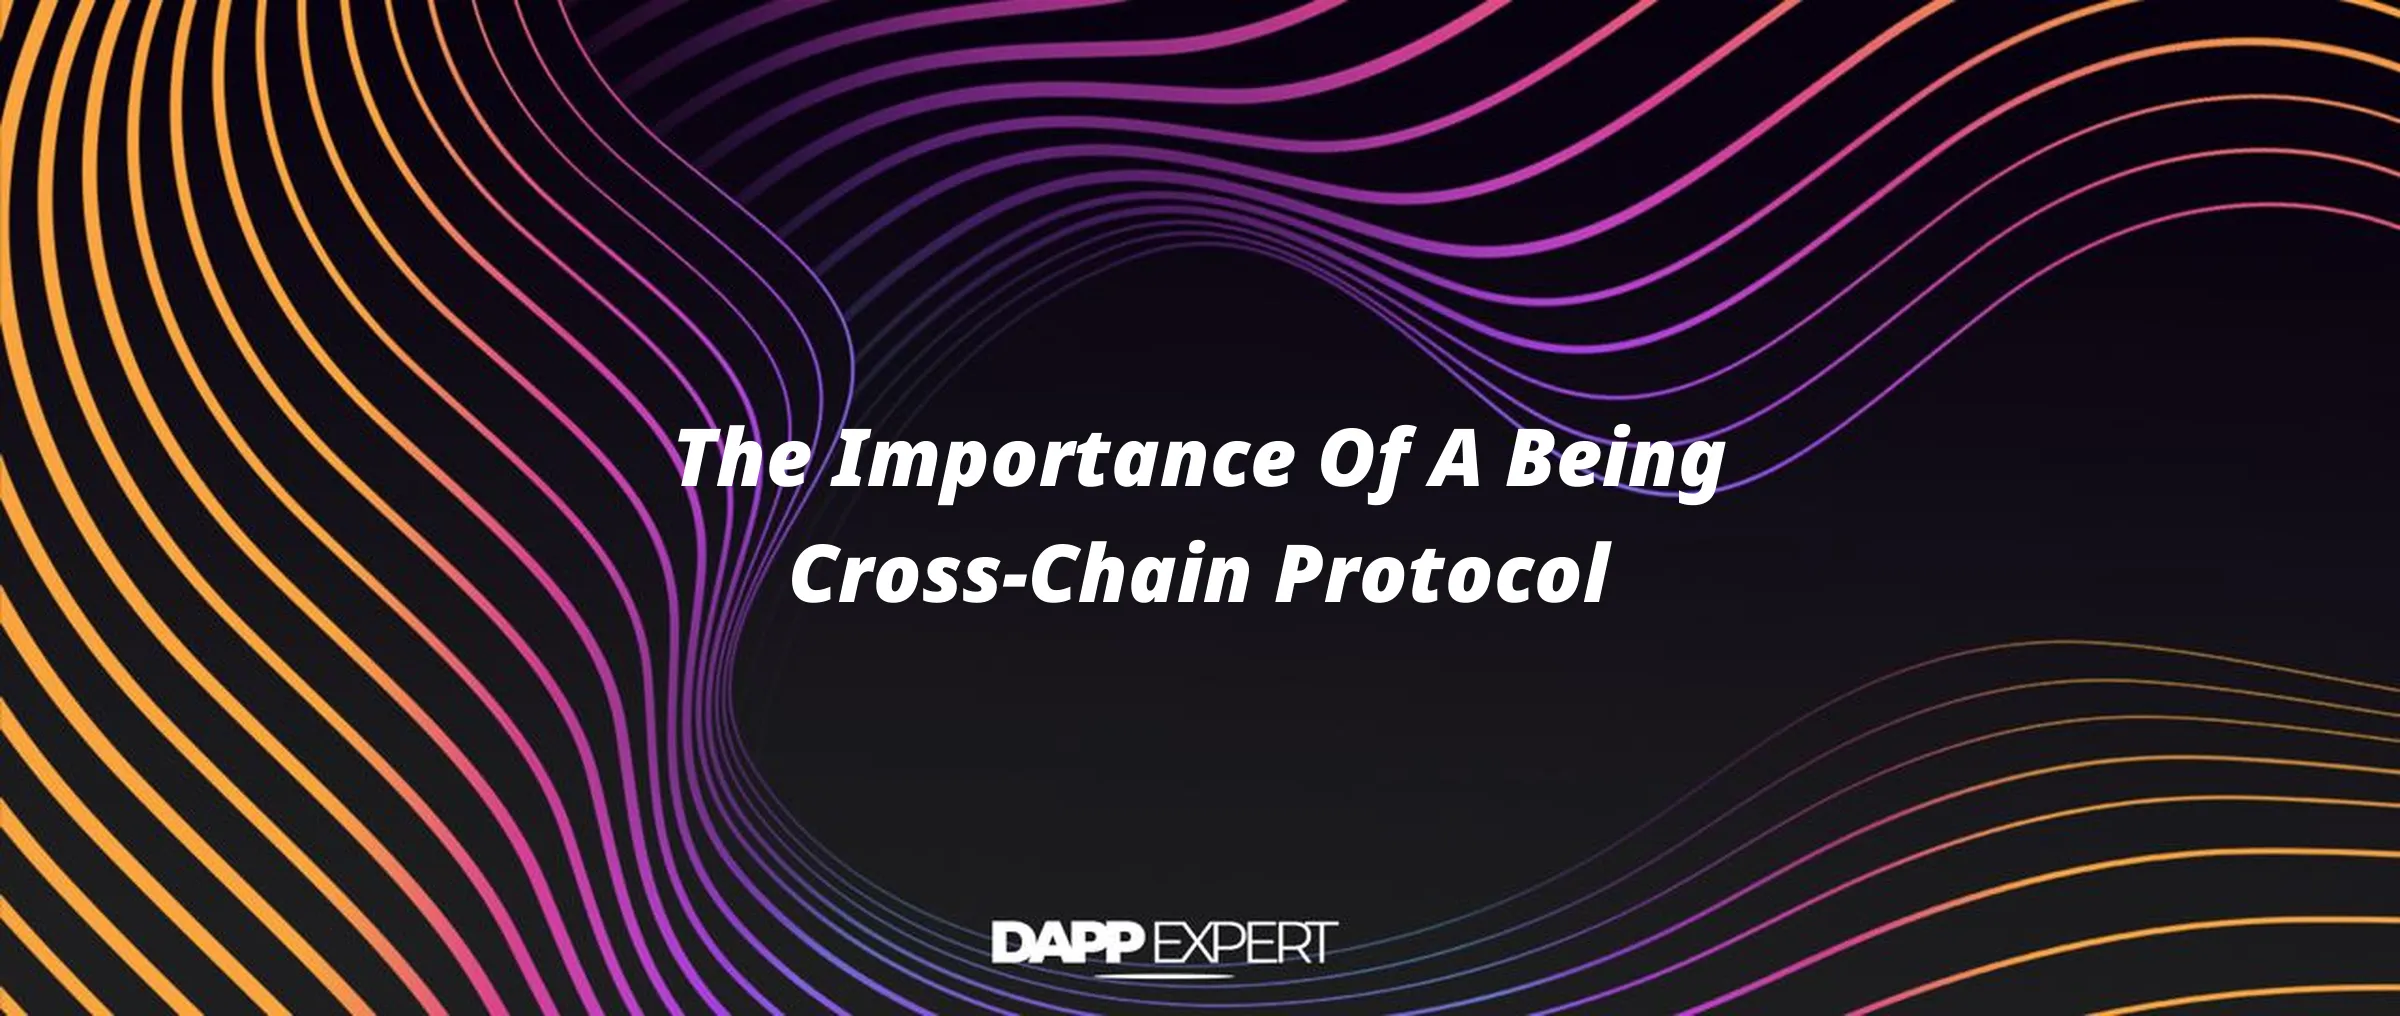 The Importance Of A Being Cross-Chain Protocol